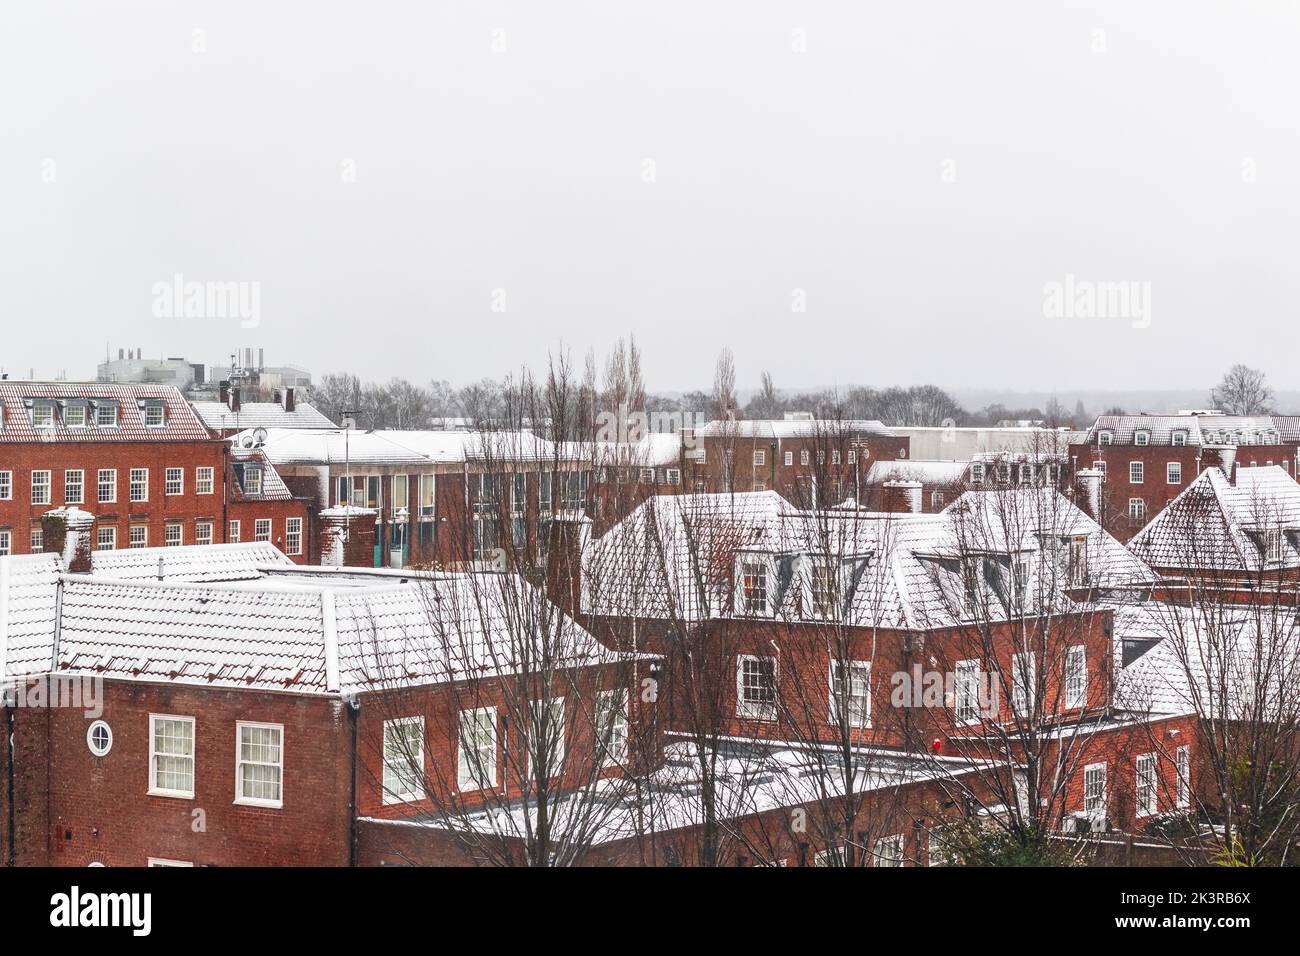 House roofs covered in snow in Welwyn Garden City, Hertfordshire, England Stock Photo